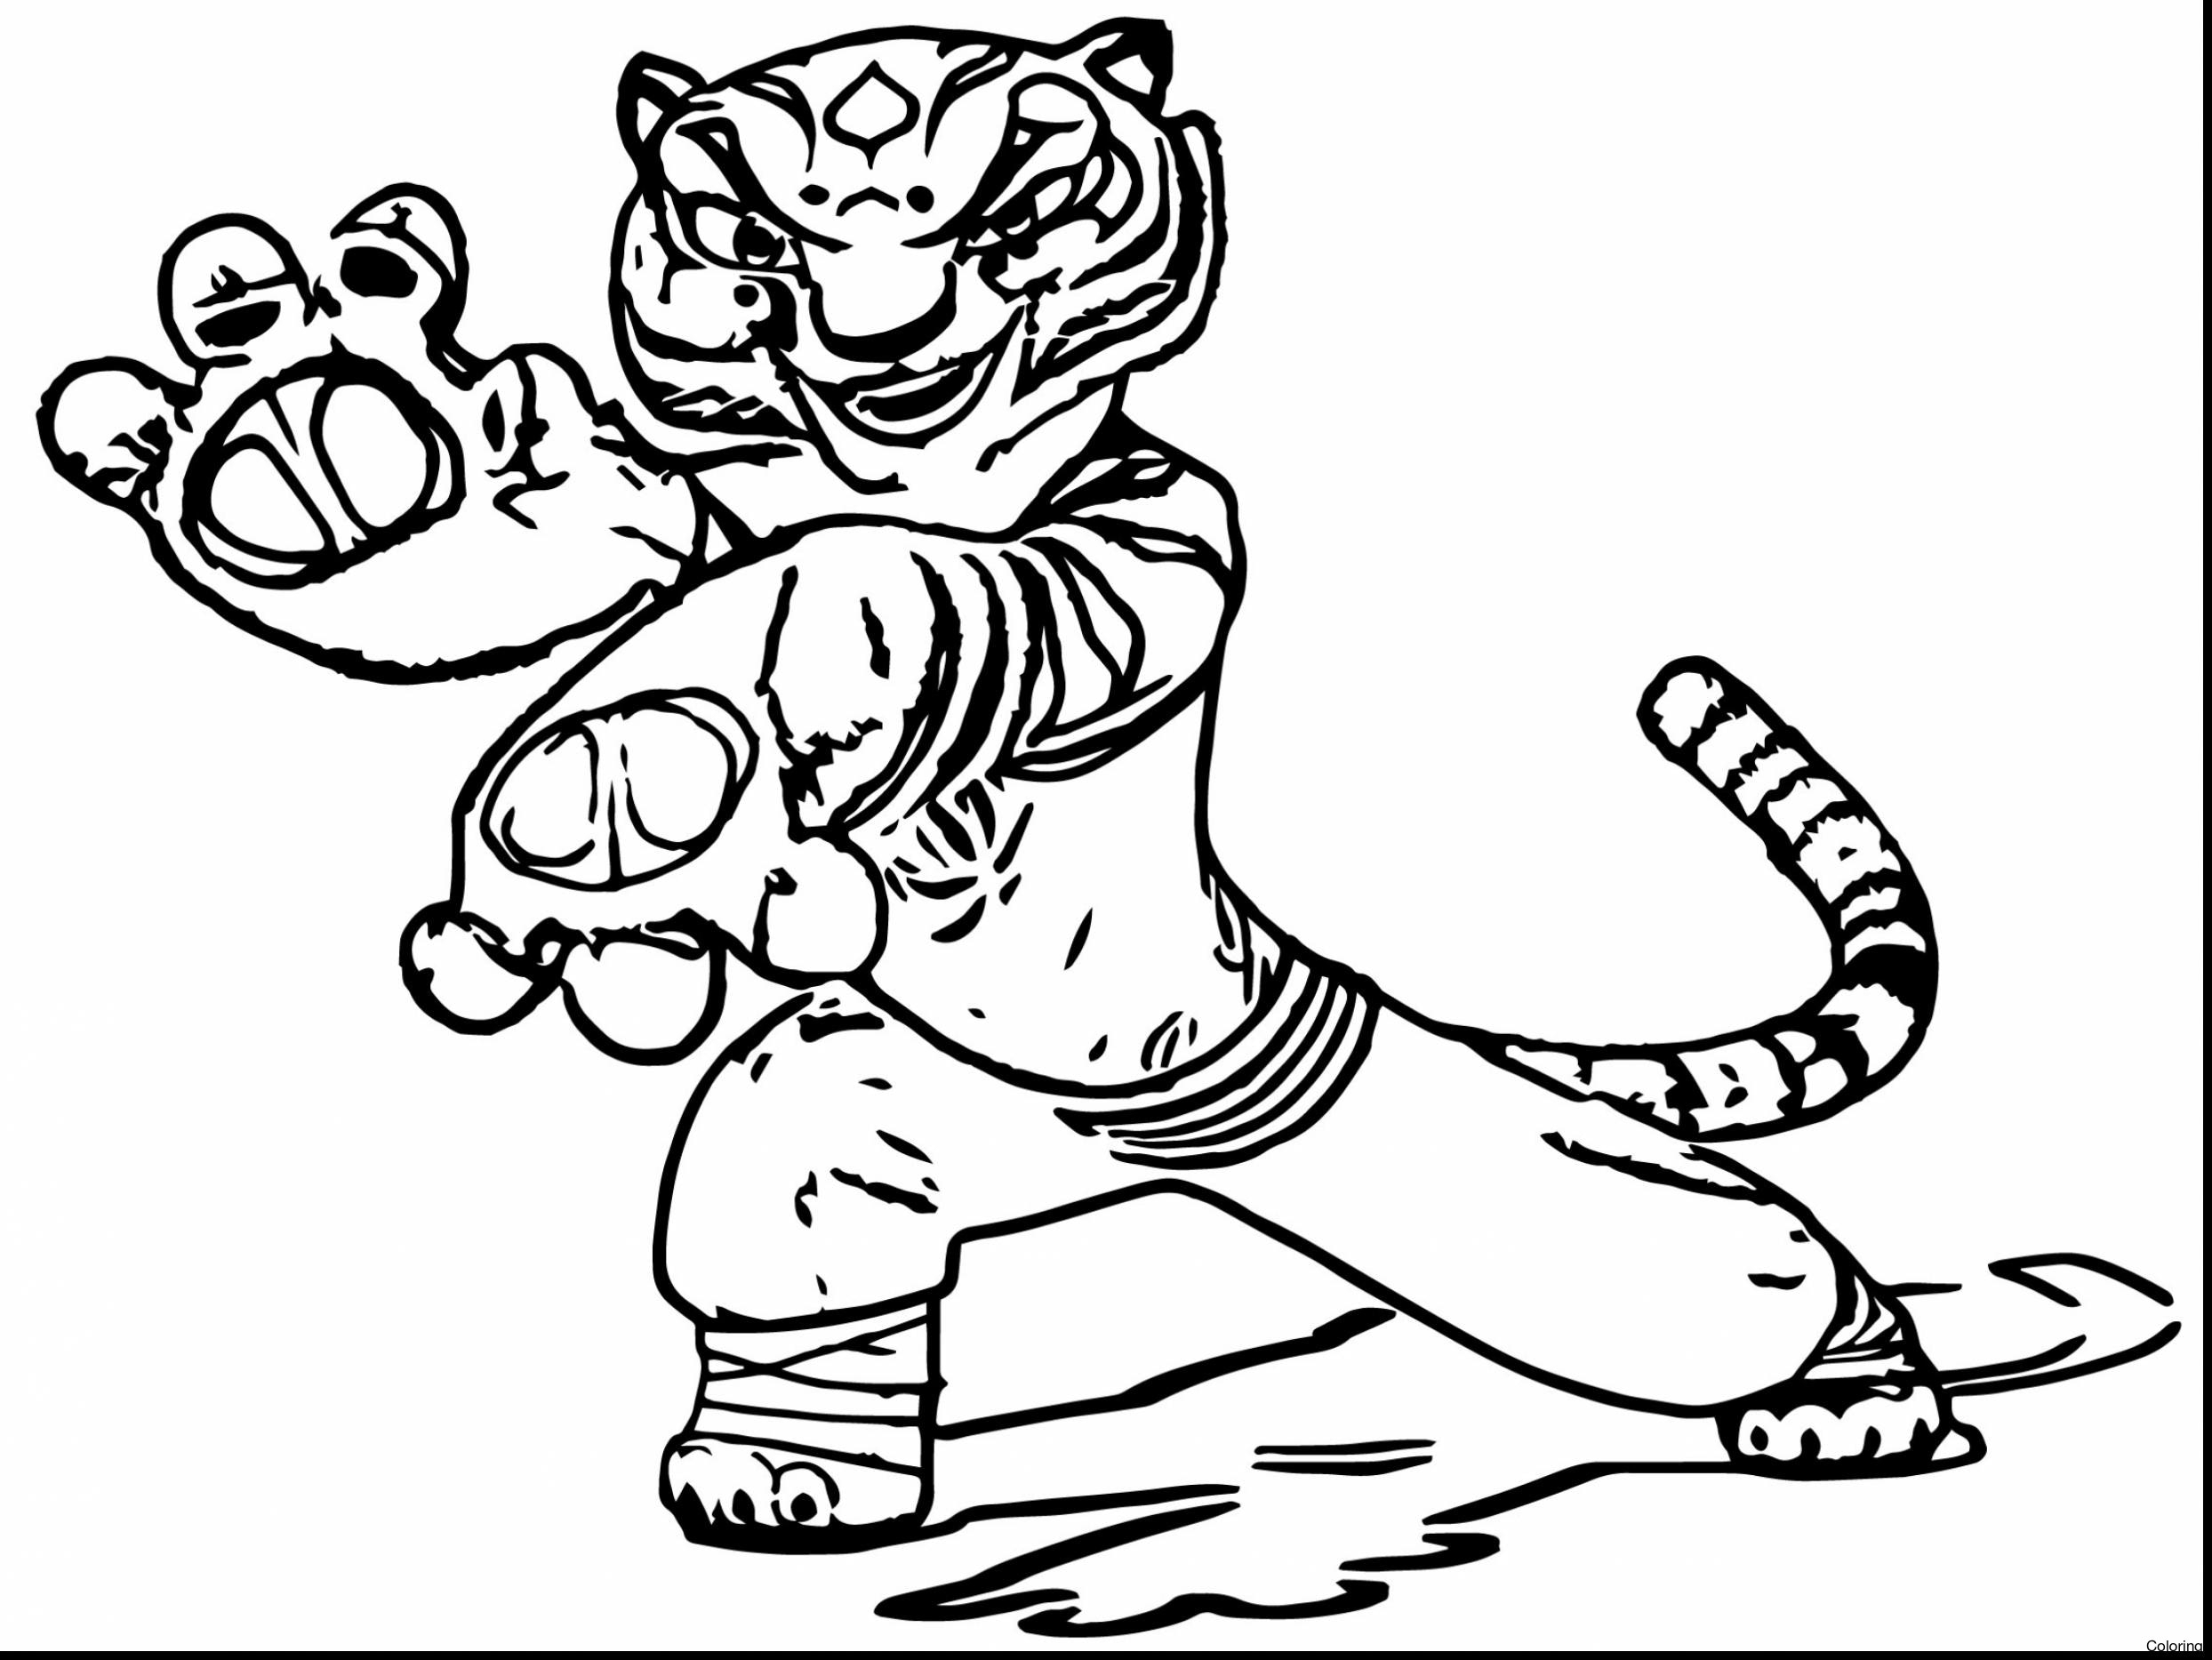 Exclusive Picture of Red Panda Coloring Page - entitlementtrap.com